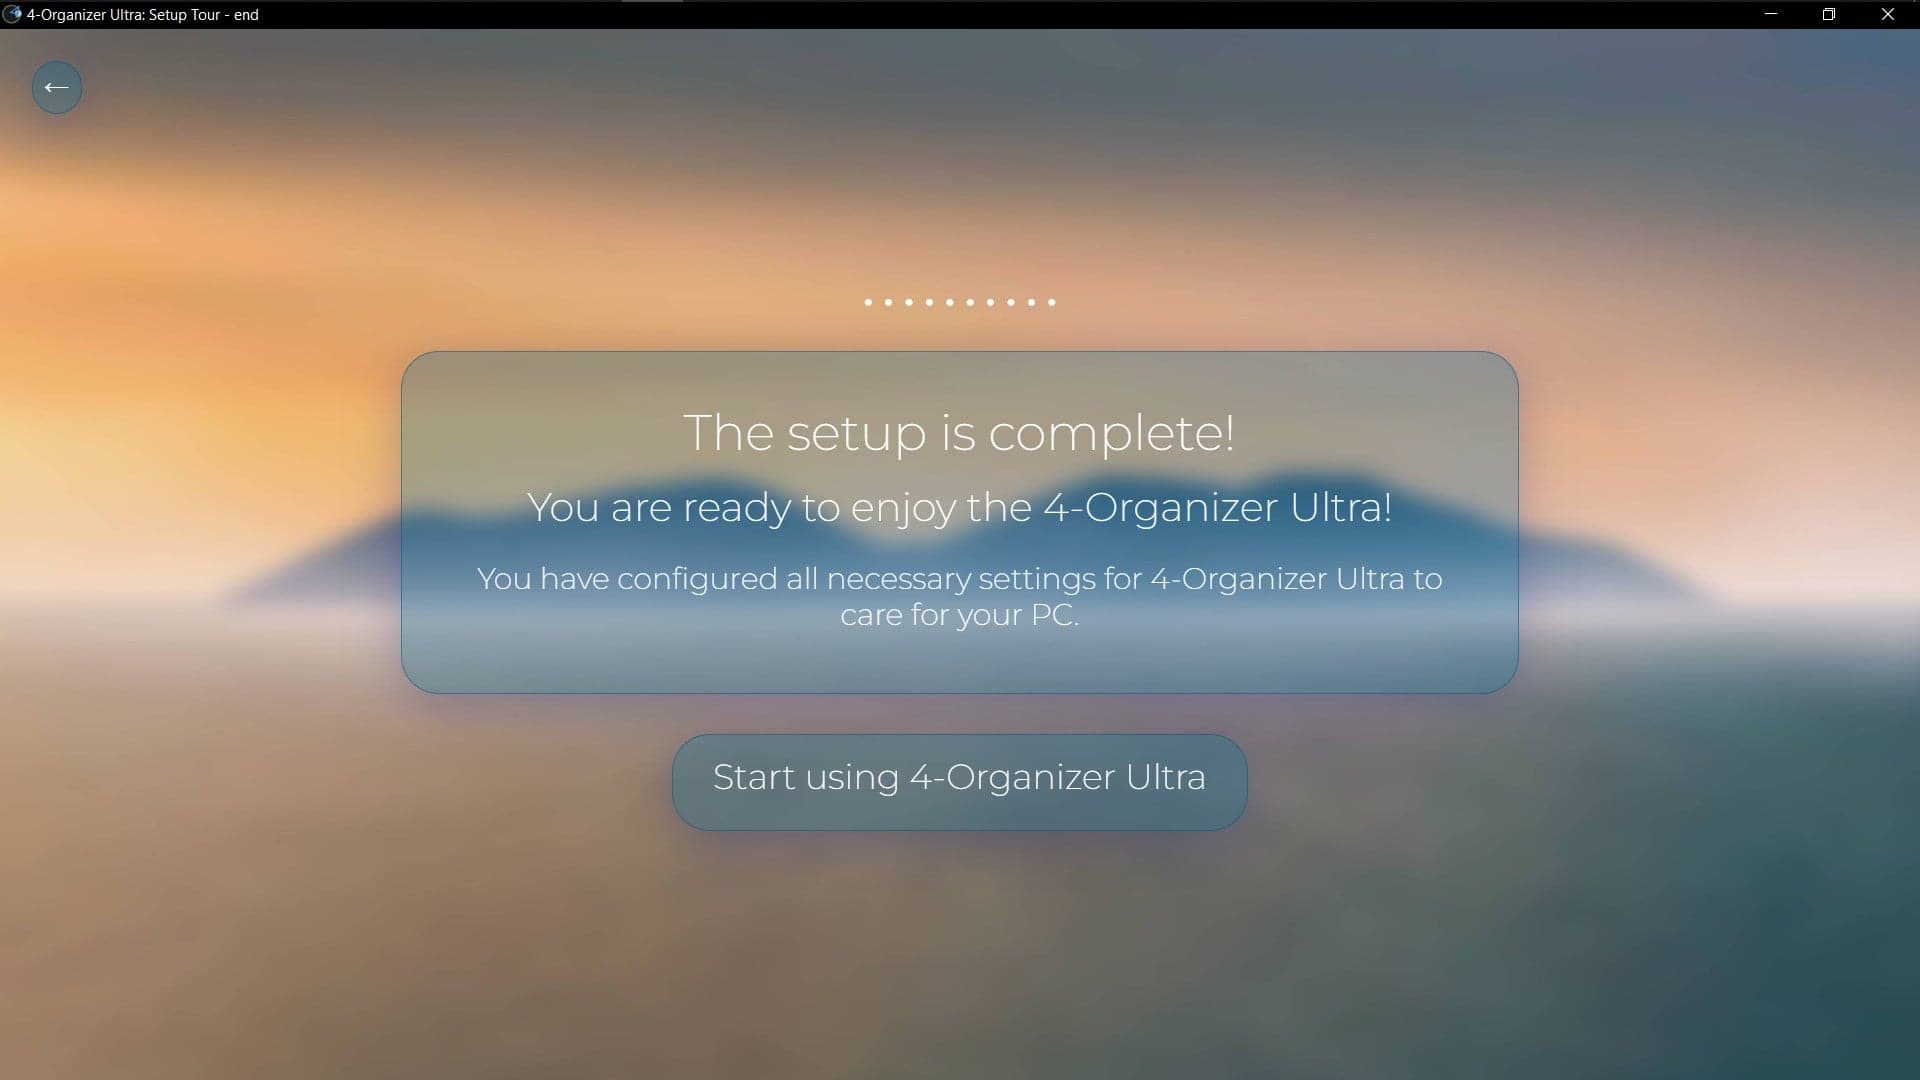 Screenshot of 'Setup Tour completed' window of 4-Organizer Ultra